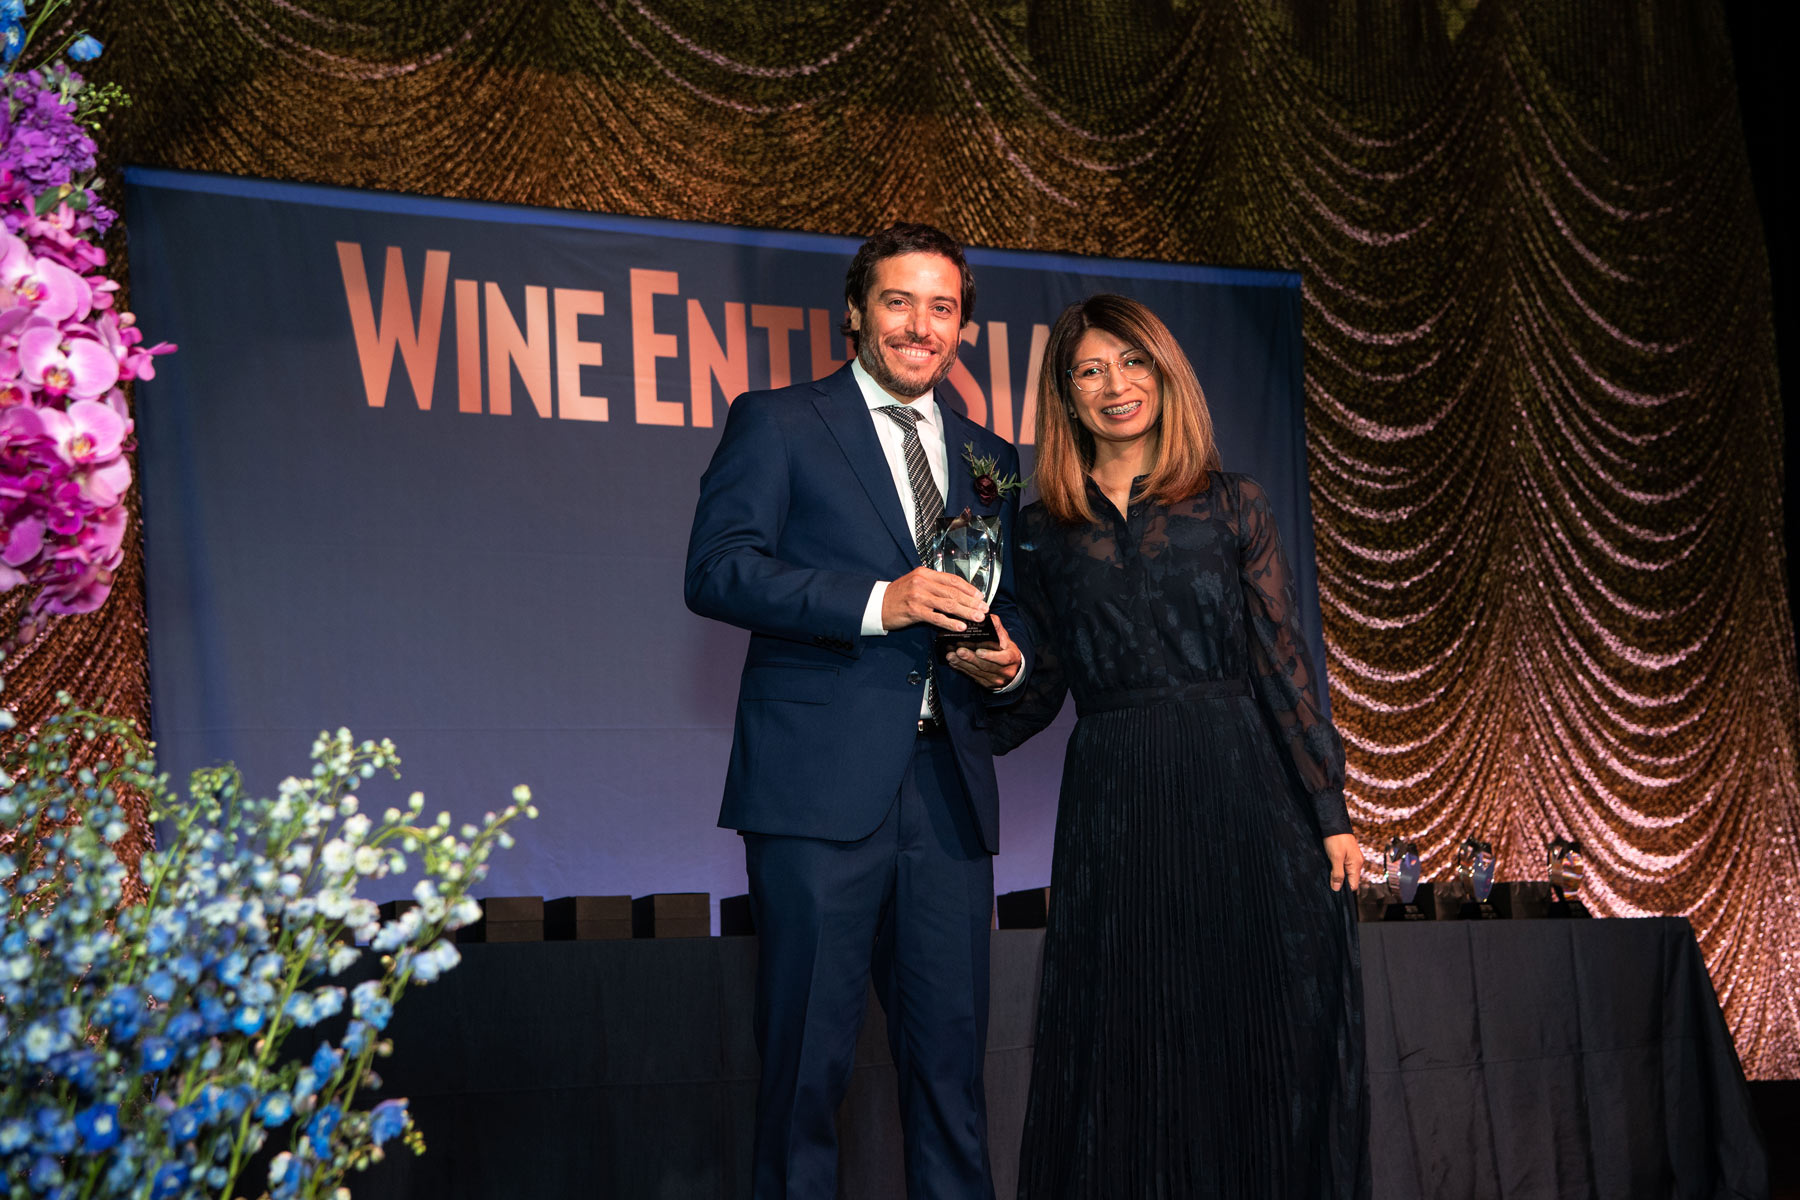 NEW WORLD WINERY OF THE YEAR